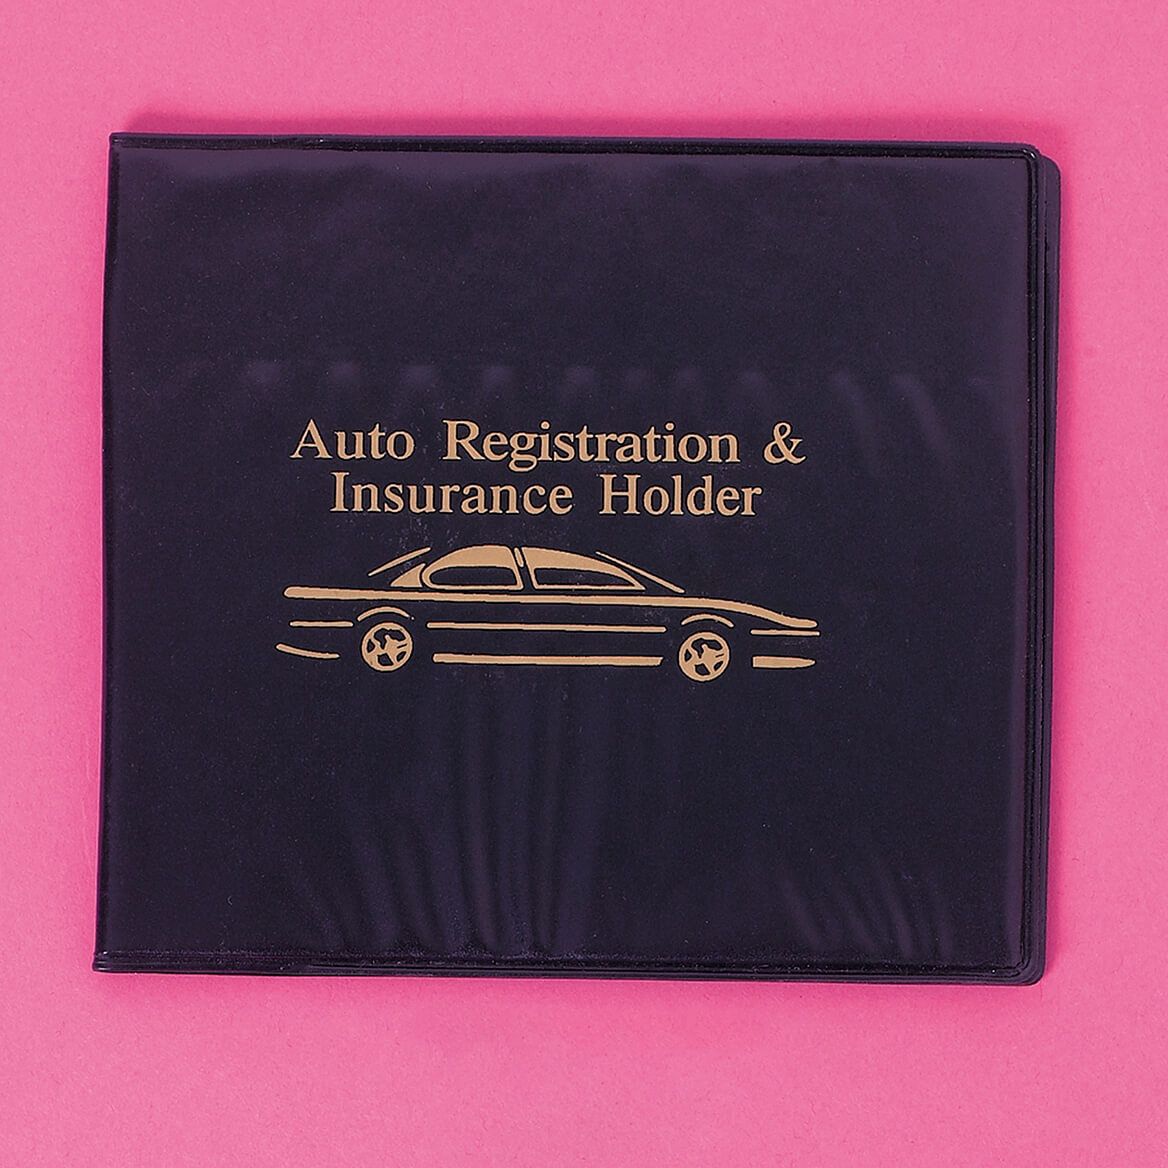 Auto Registration and Insurance Holder + '-' + 360316